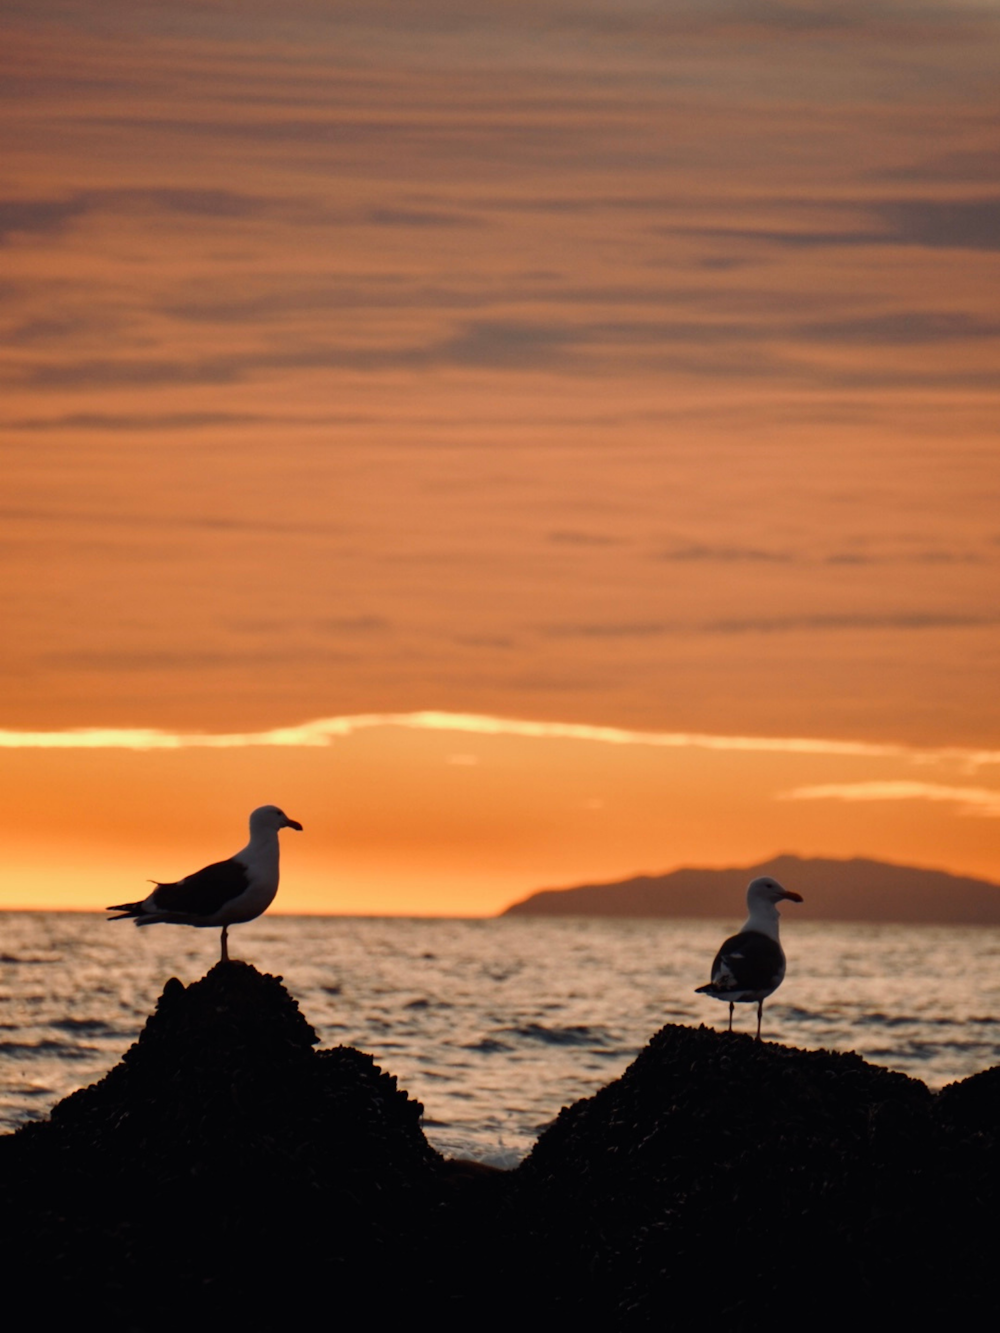 two seagulls standing on a rock in front of a sunset